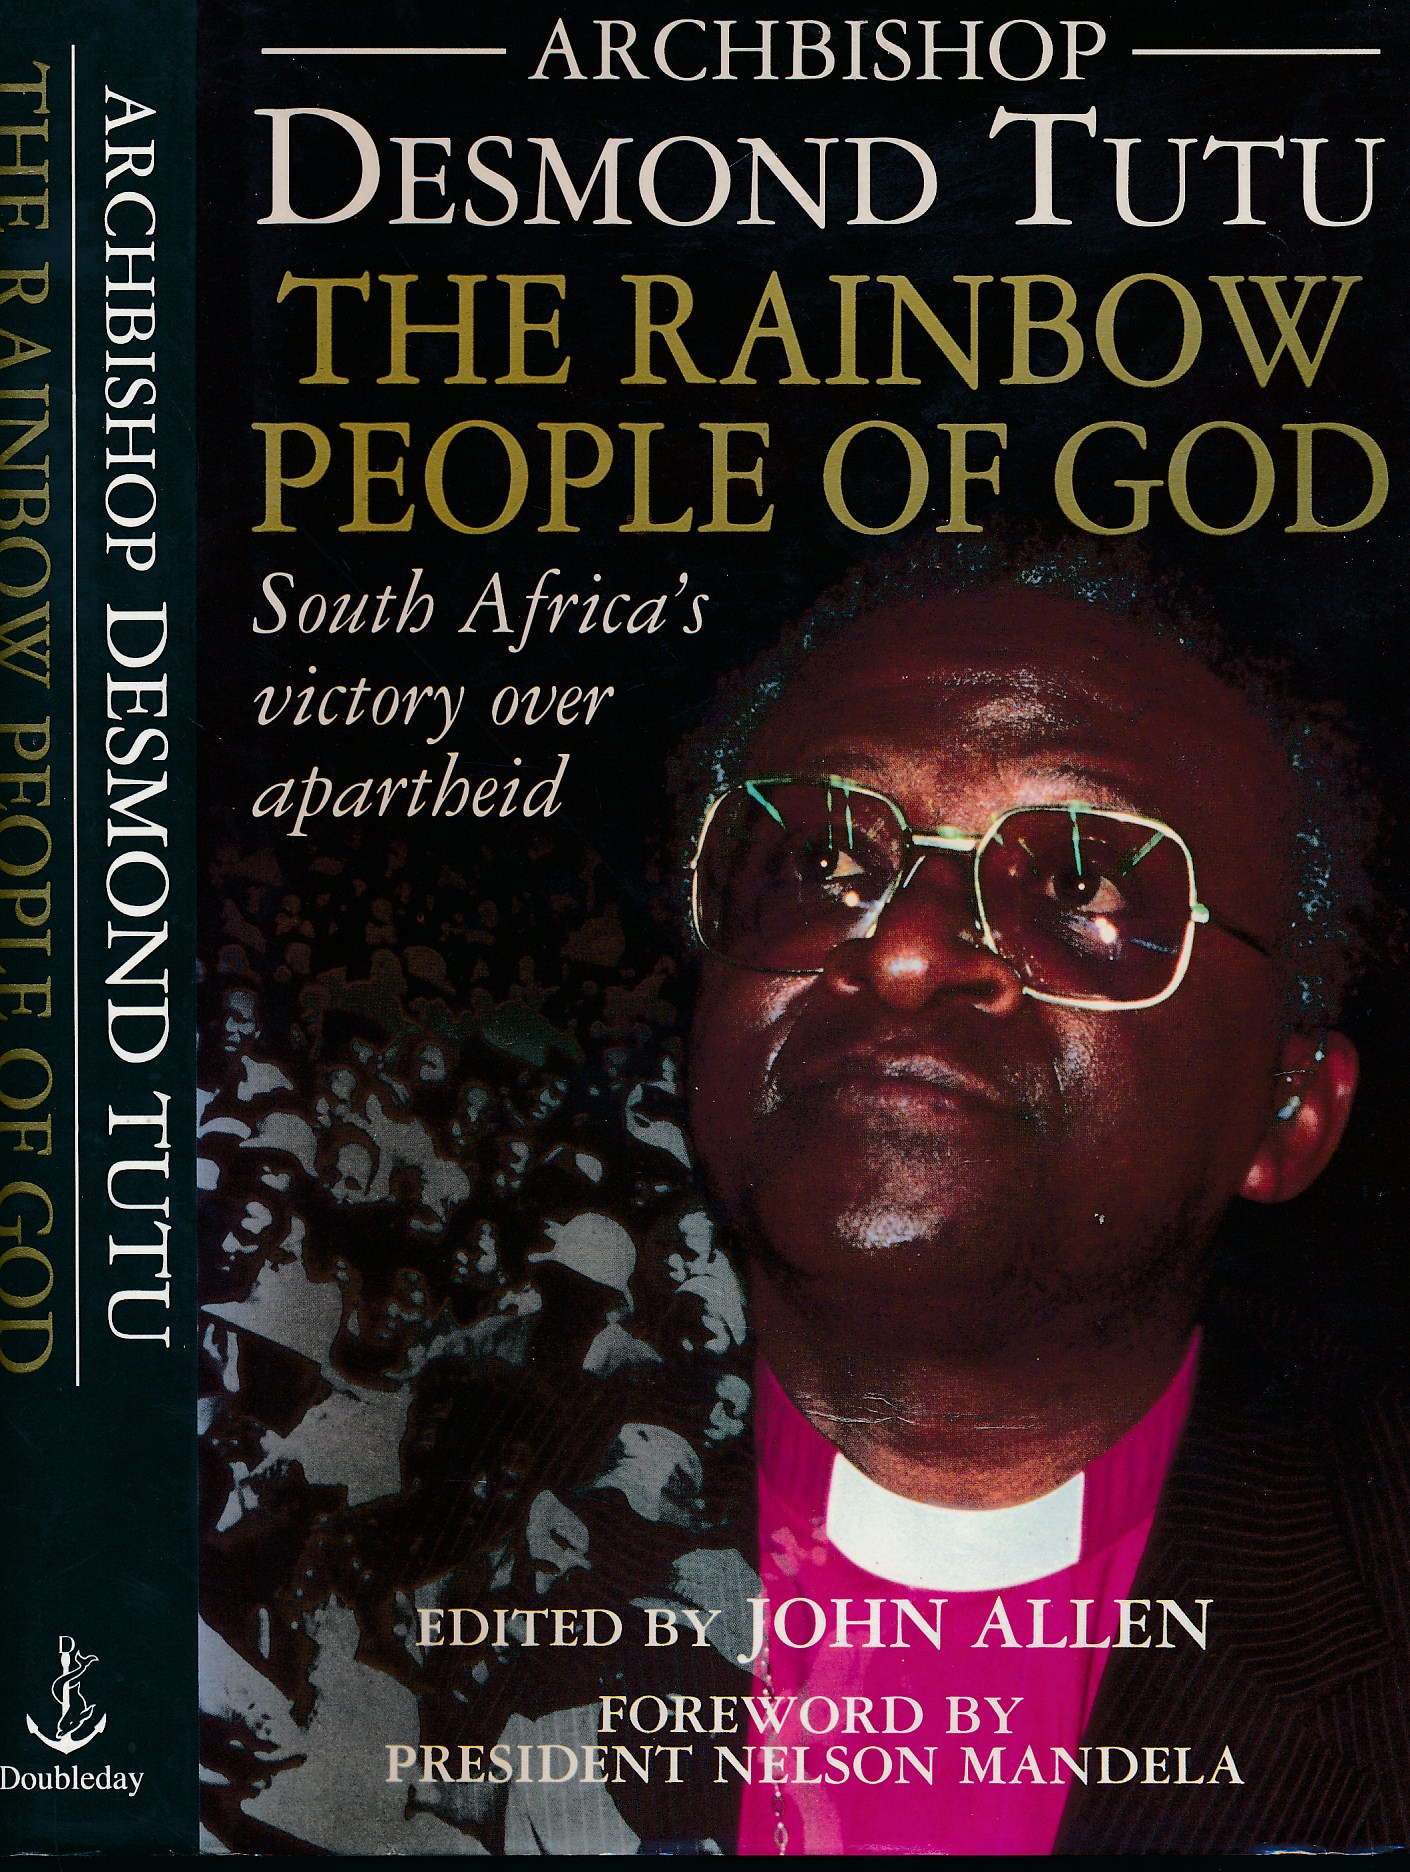 The Rainbow People of God. South Africa's Victory Over Apartheid. Signed by Desmond Tutu.